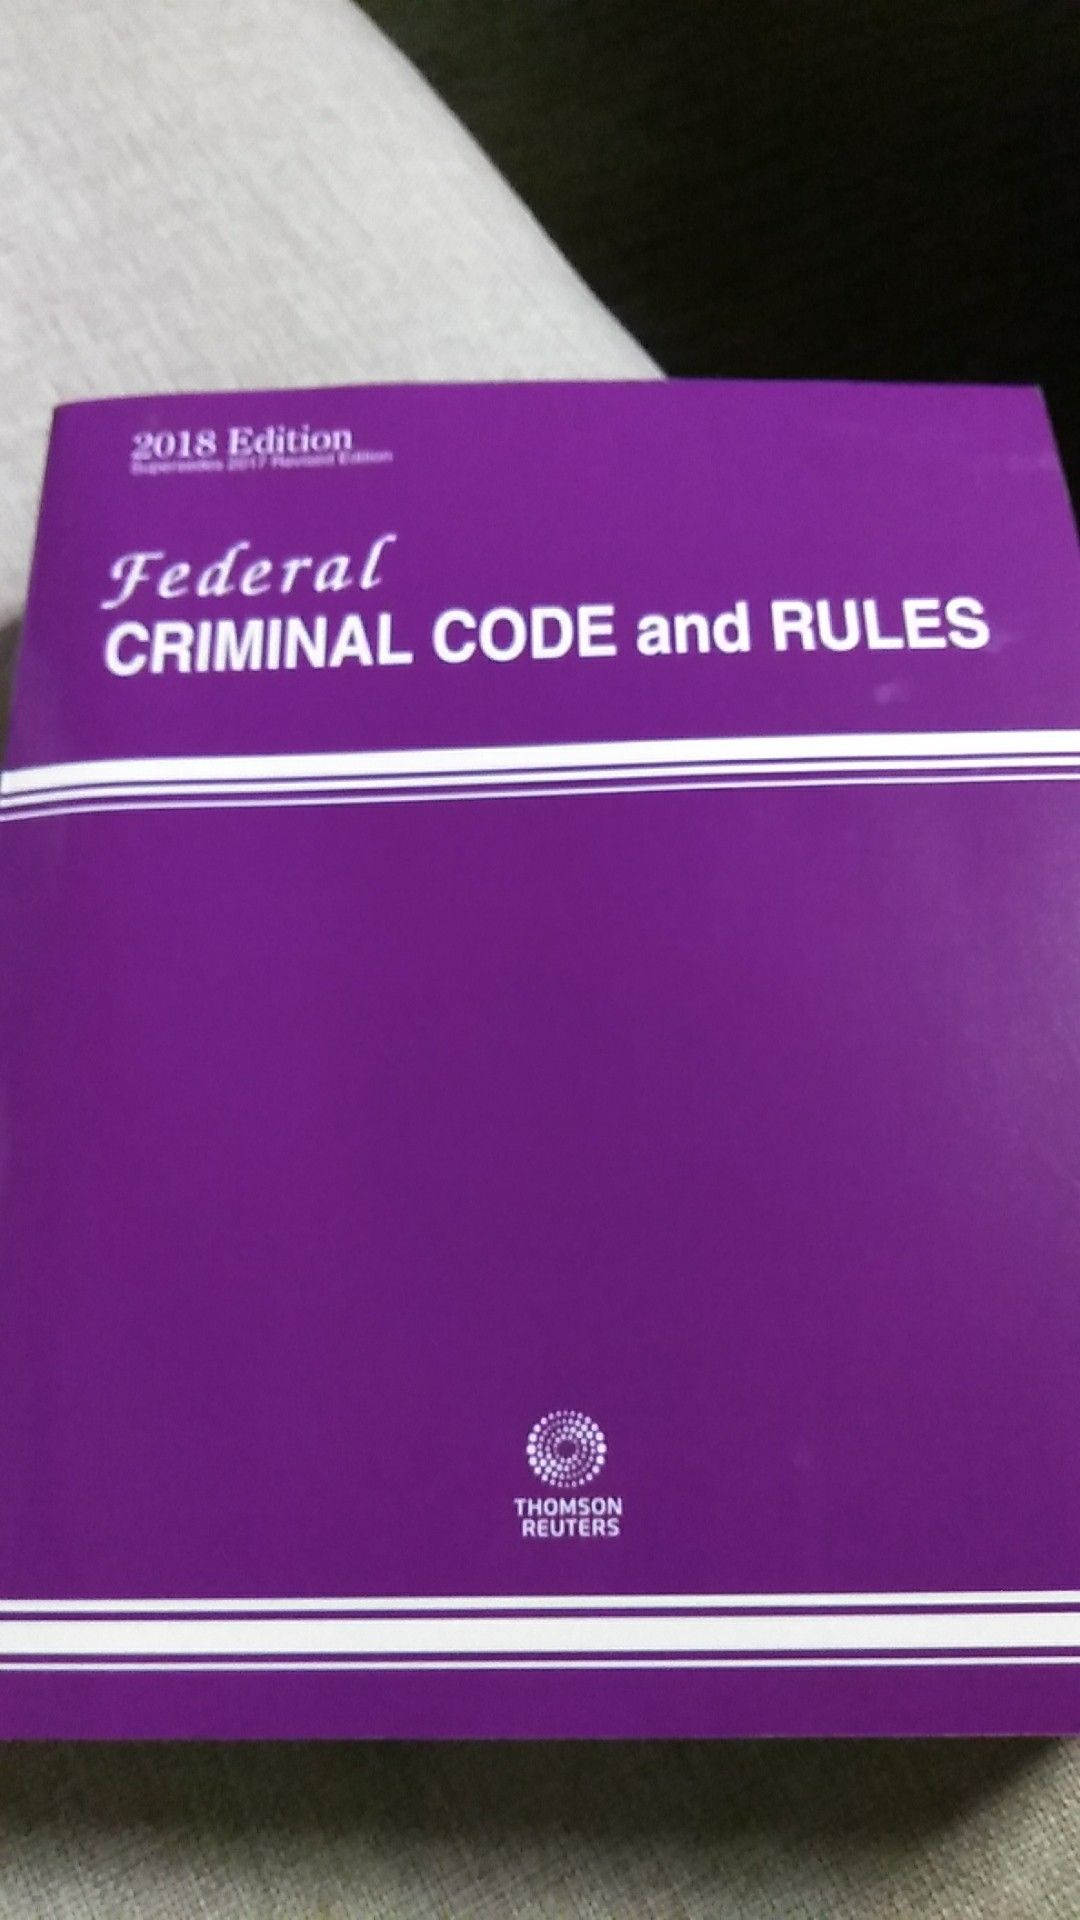 2018 federal criminal code and rules